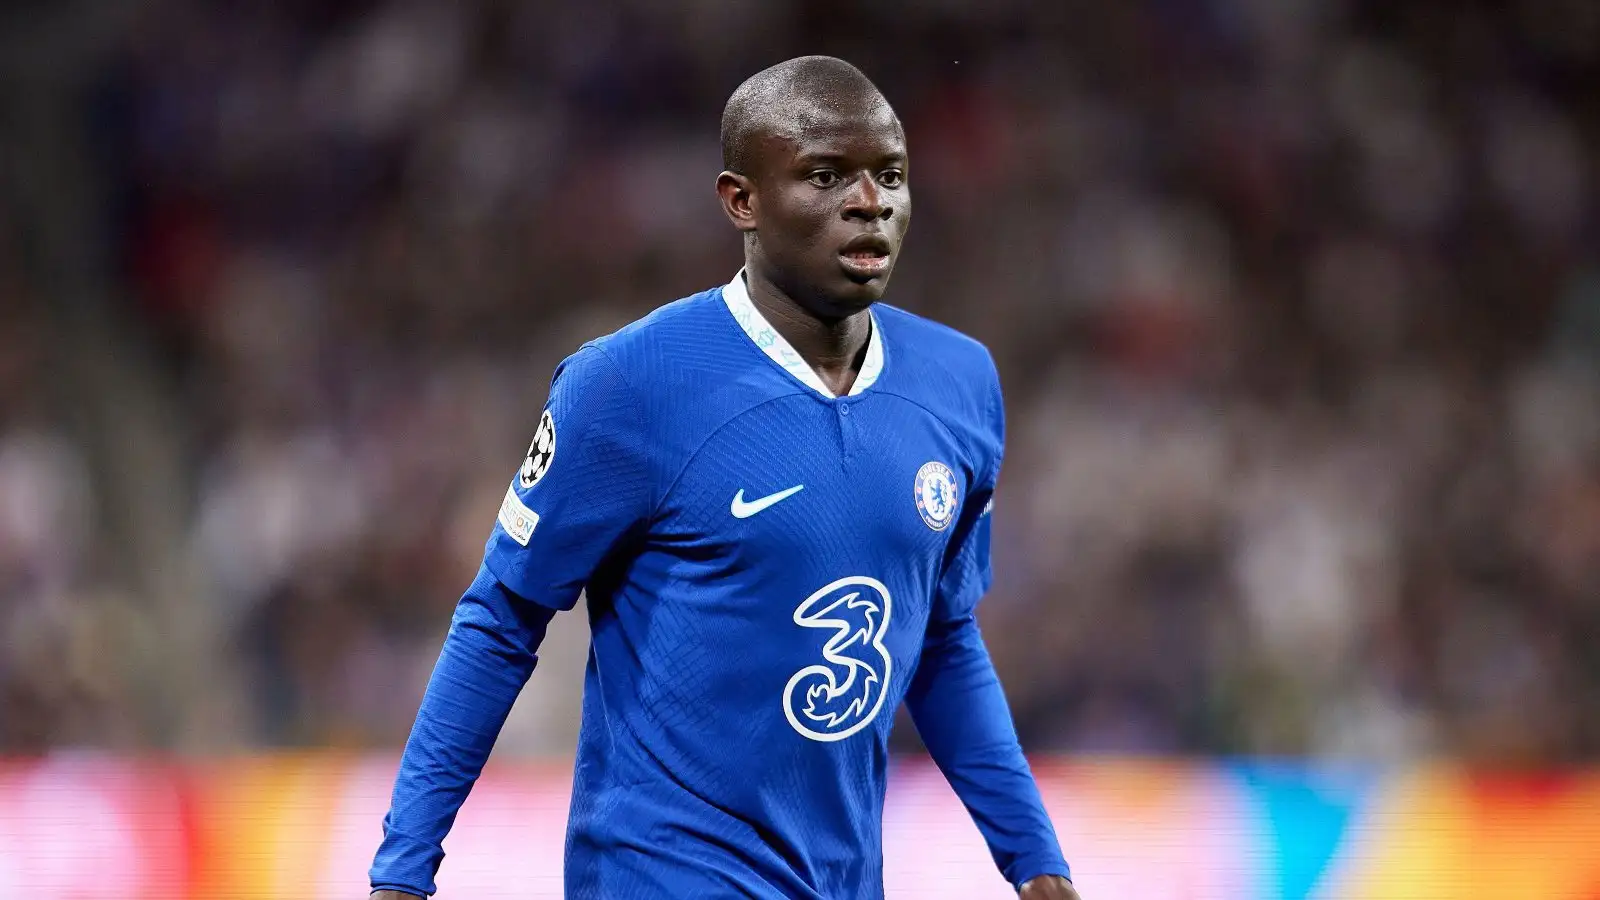 Chelsea midfielder N'Golo Kante during a match